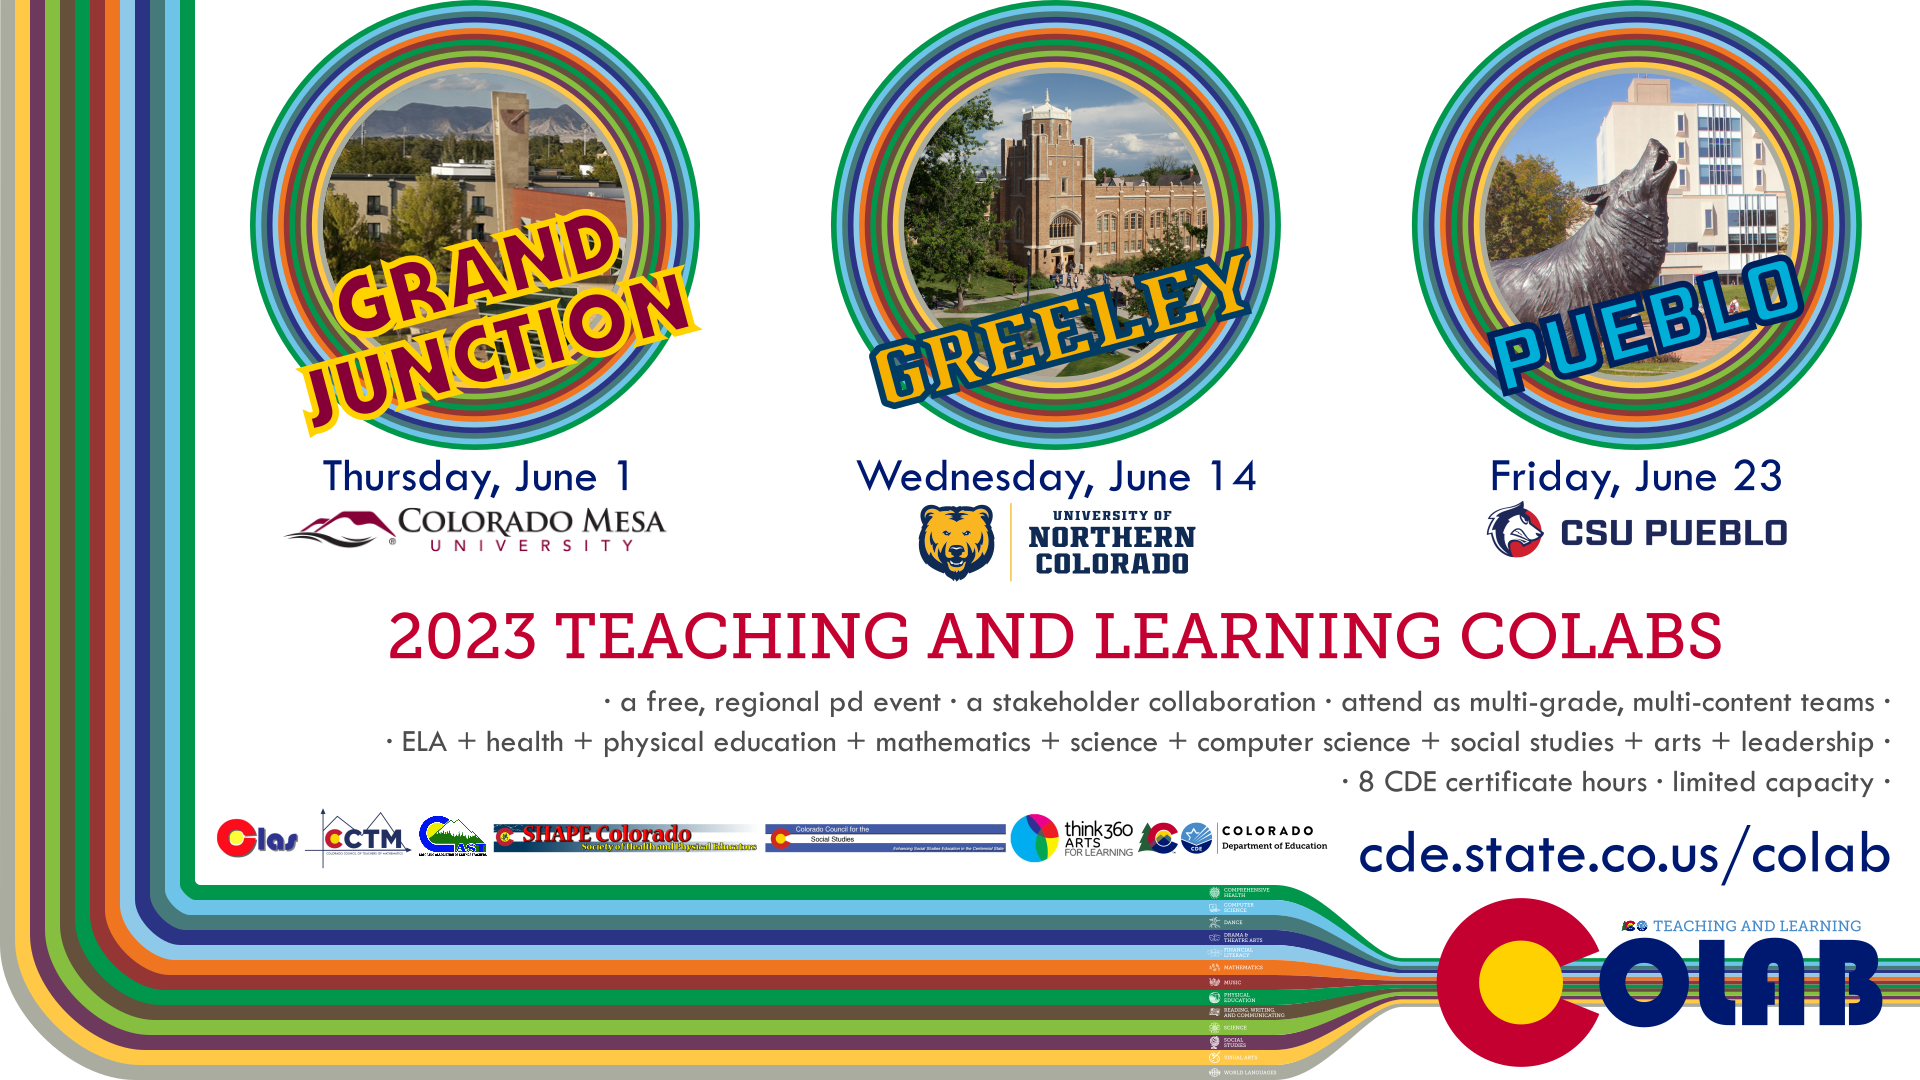 Register for this summer's Teaching and Learning CoLabs: Thursday, June 1: Grand Junction, hosted by Colorado Mesa University Register Here Wednesday, June 14: Greeley, hosted by the University of Northern Colorado Register Here Friday, June 23: Pueblo, hosted by CSU-Pueblo Register Here These are one-day, no-cost, multi-disciplinary regional professional development opportunities developed in partnership with Colorado's higher education institutions, professional teaching organizations (SHAPE Colorado), and CDE. This year's content areas include ELA, math, health, physical education, science, computer science, social studies, visual and performing arts, and school leadership. Schools are encouraged to attend a CoLab in teams, with teachers representing multiple grades and content areas. We are collaborating with SHAPE Colorado to identify engaging speakers for health and physical education and are planning on 6 breakout sessions to support physical education and 6 sessions to support health education. Registration and schedules can be found on the Teaching and Learning CoLabs website. For more information please contact Jamie Hurley, hurley_j@cde.state.co.us